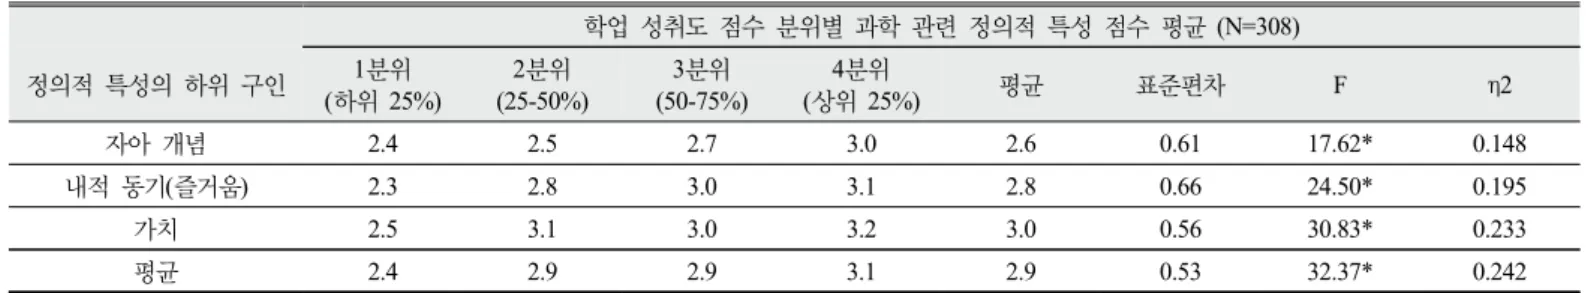 Table 5. Number of students with a big difference in cognitive achievement between subjects